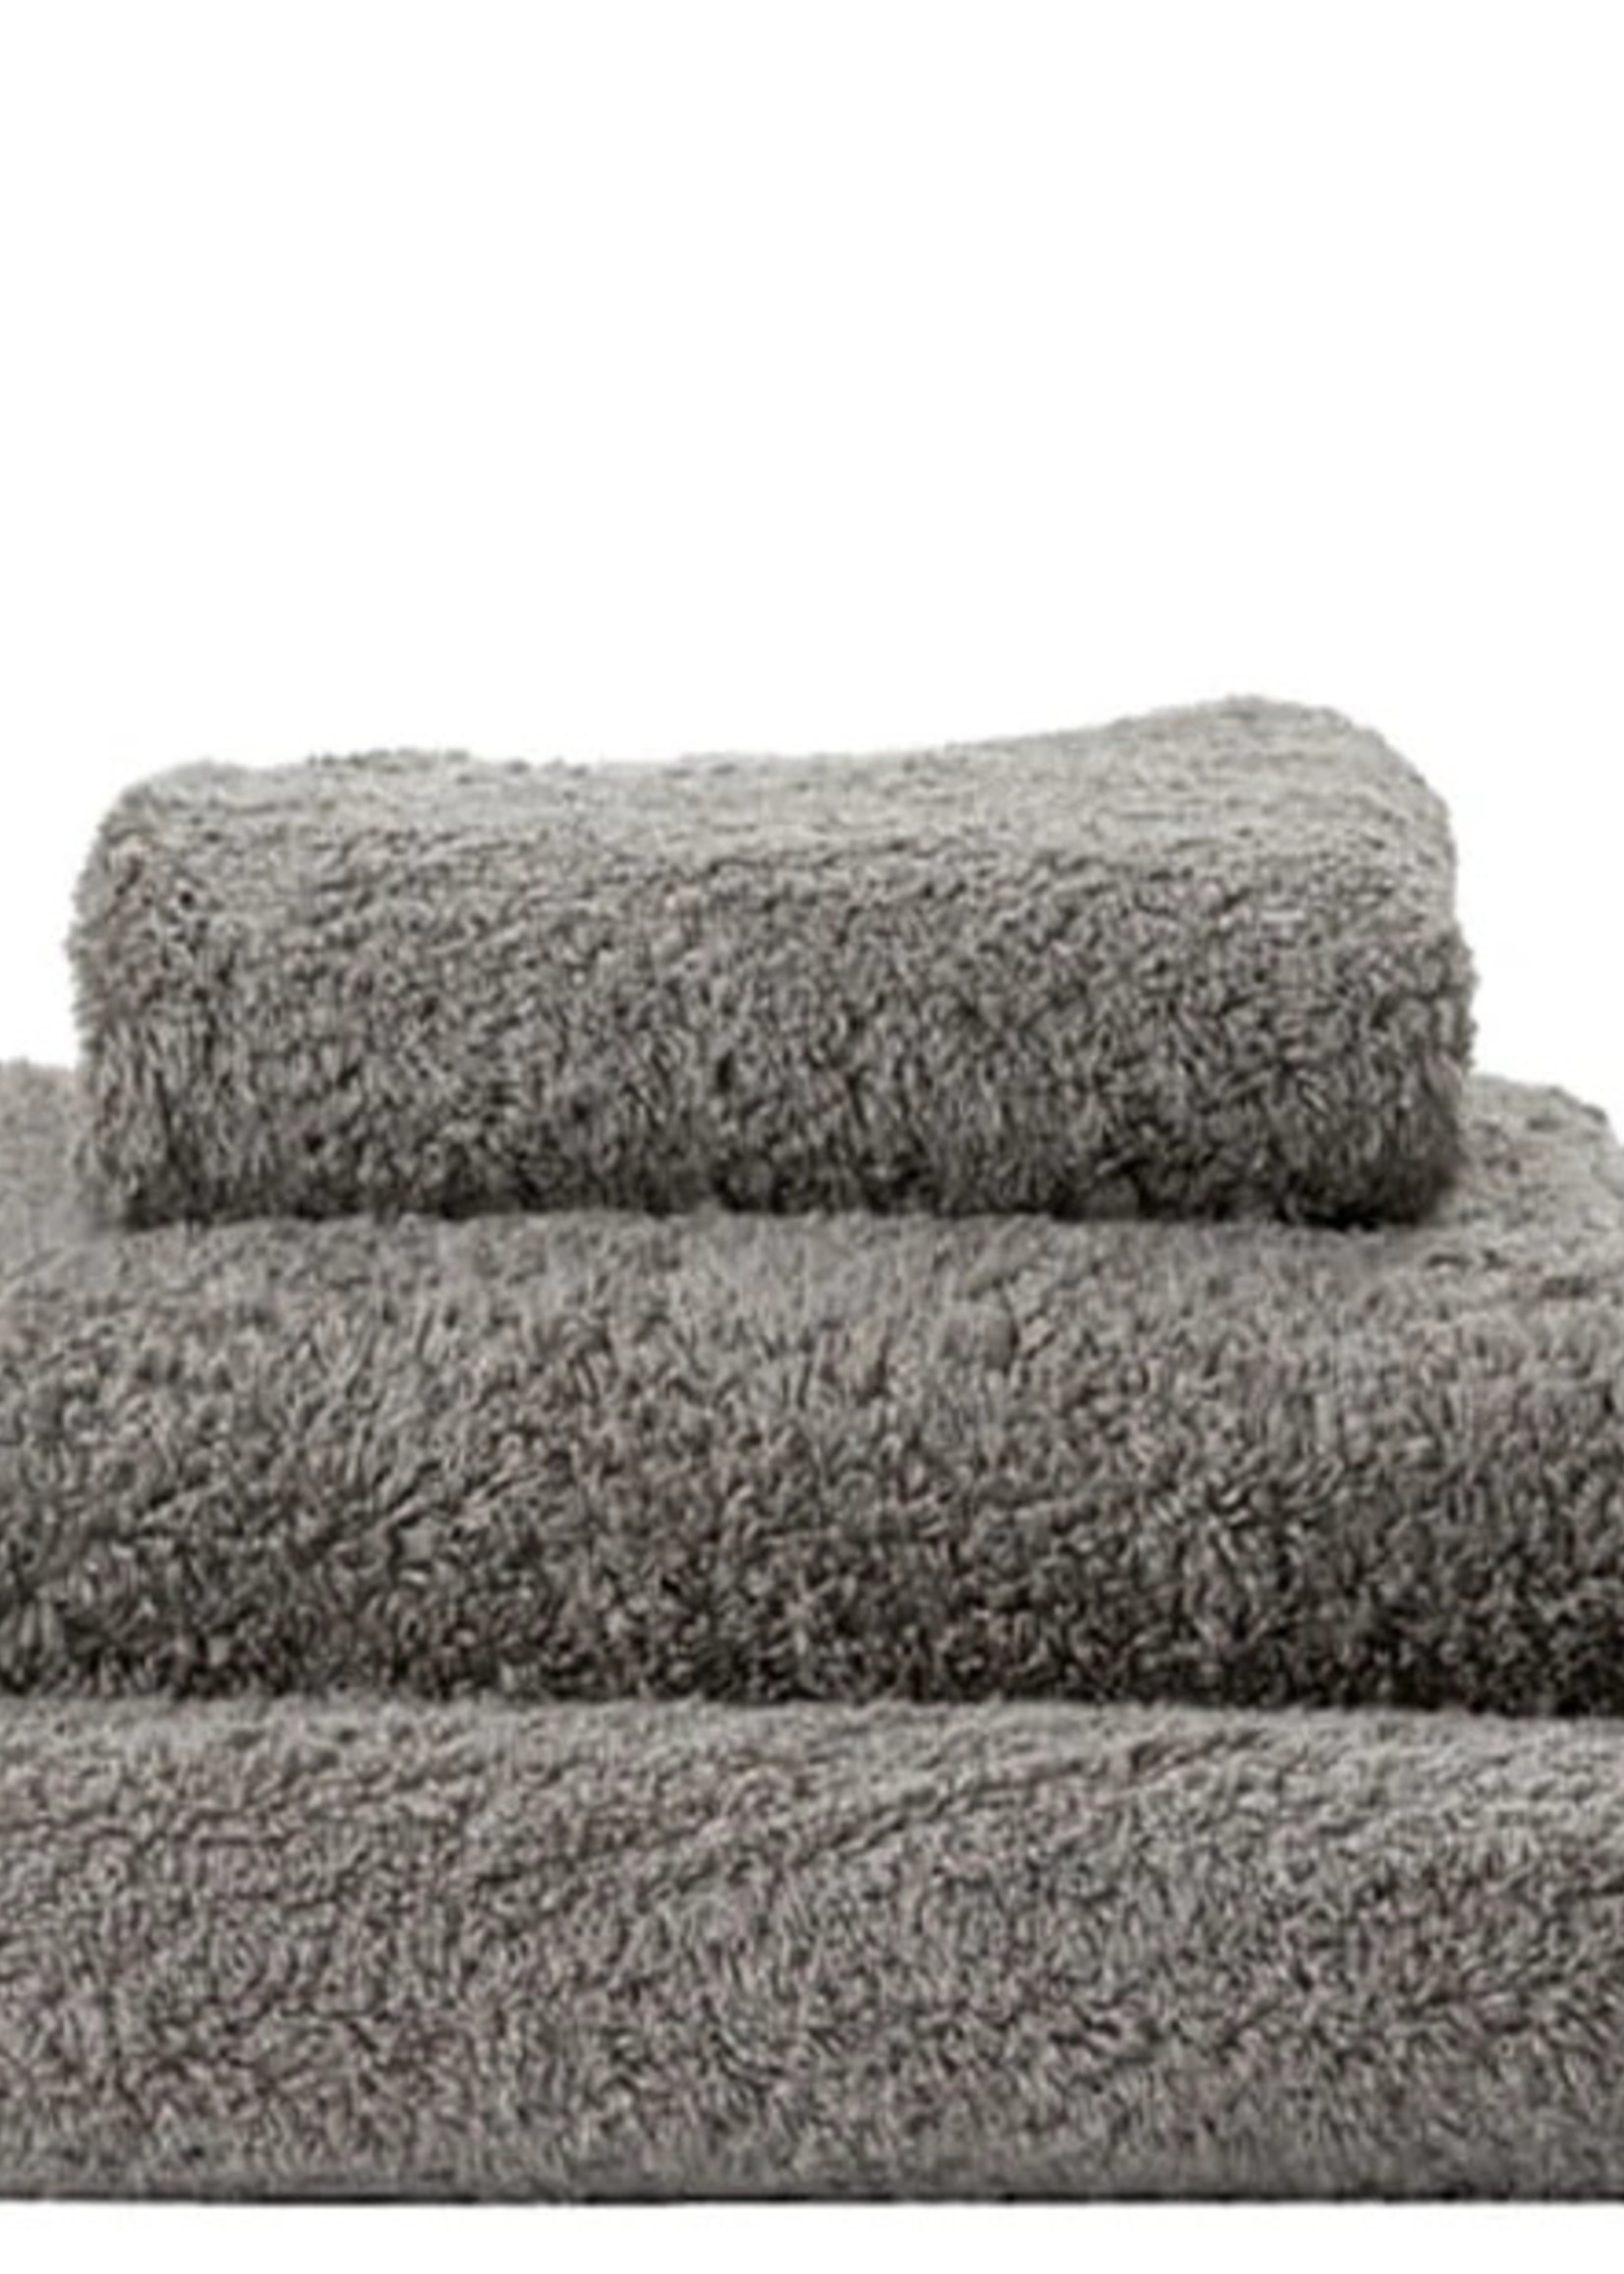 Abyss & Habidecor Super Pile Atmosphere Towels